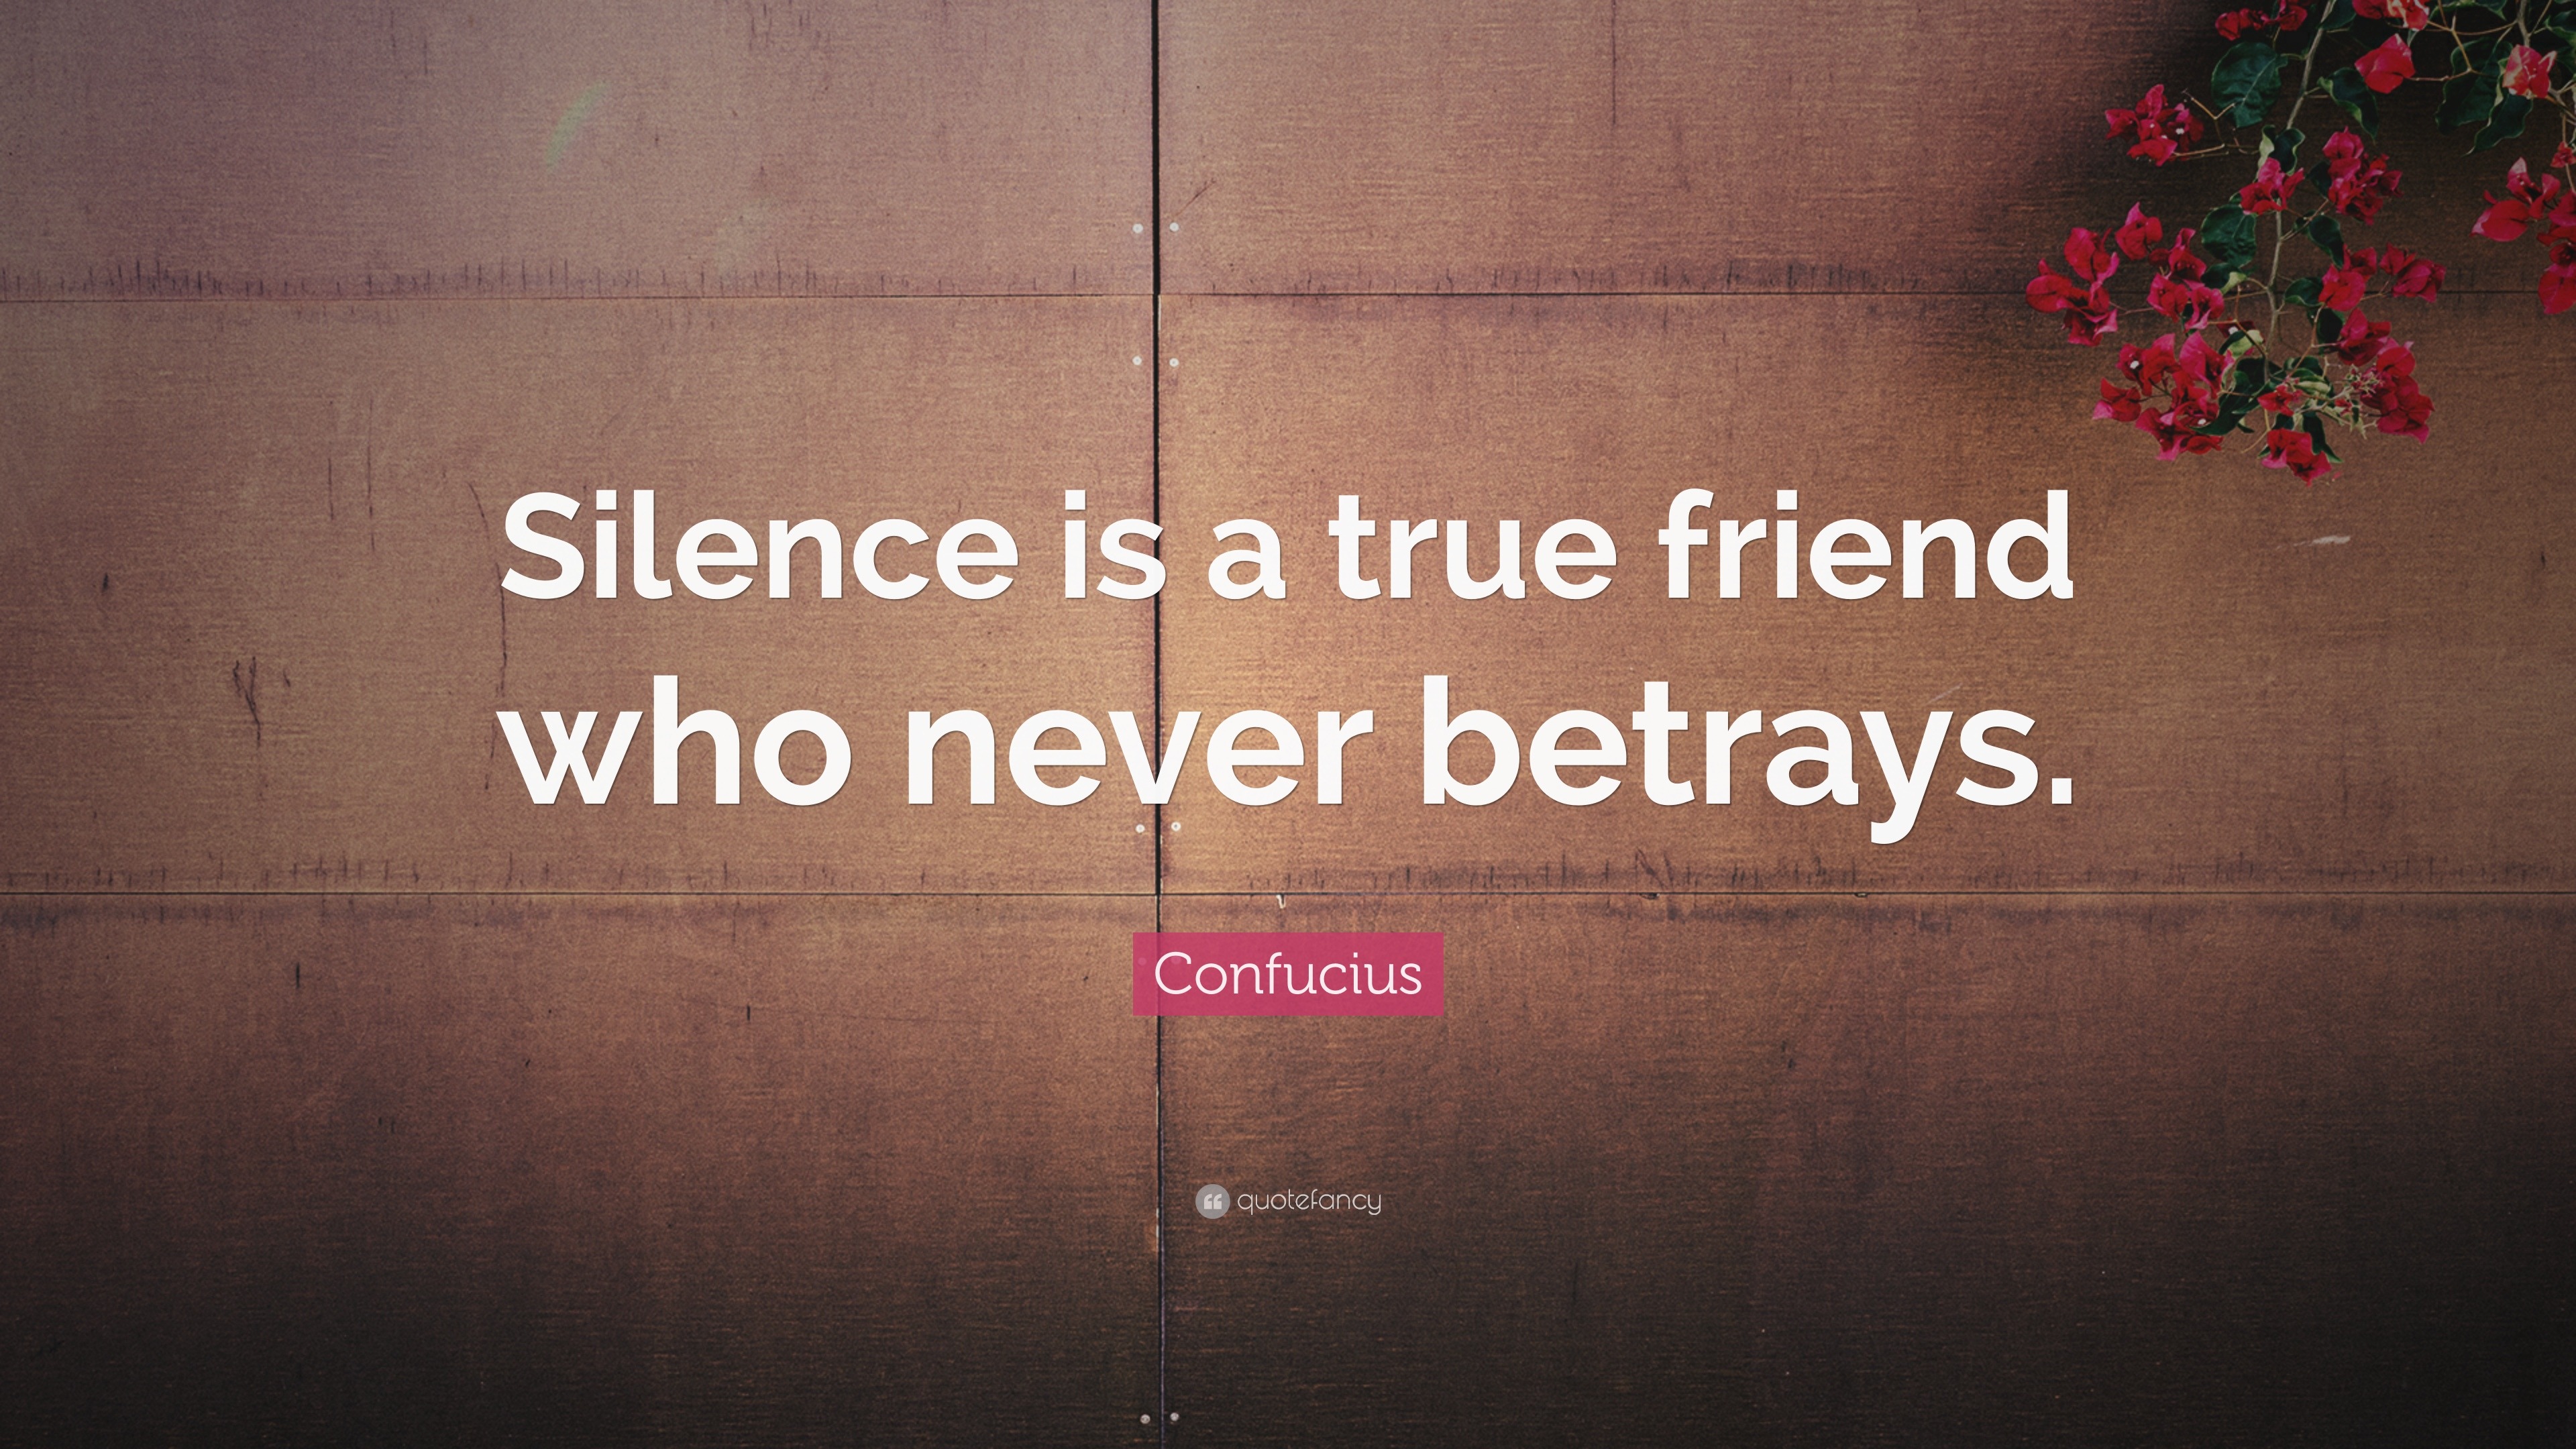 silence is a true friend who never betrays essay